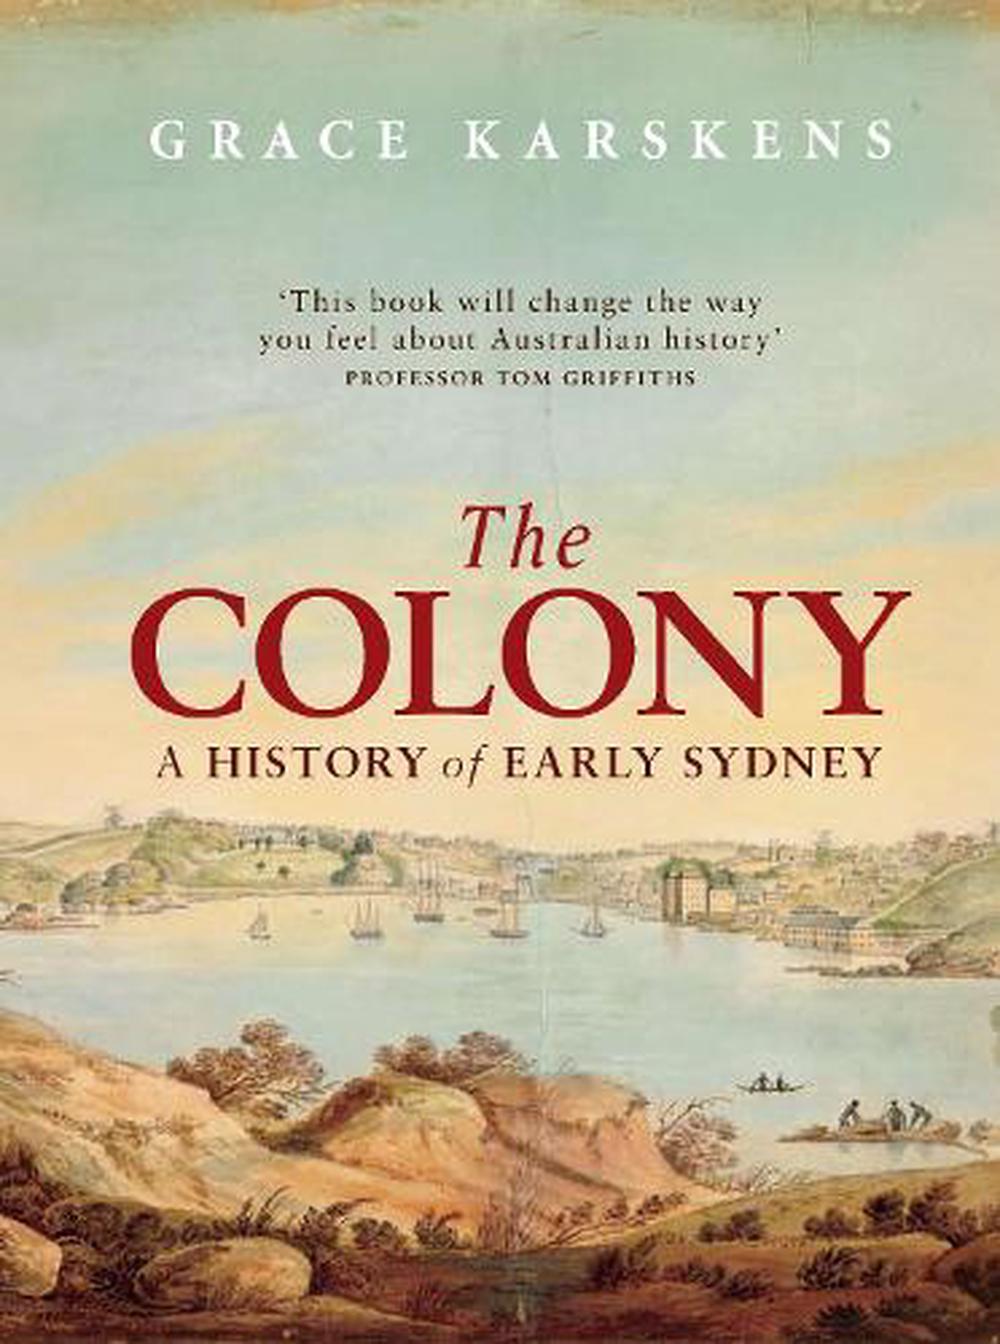 The Colony A history of early Sydney by Grace Karskens (English